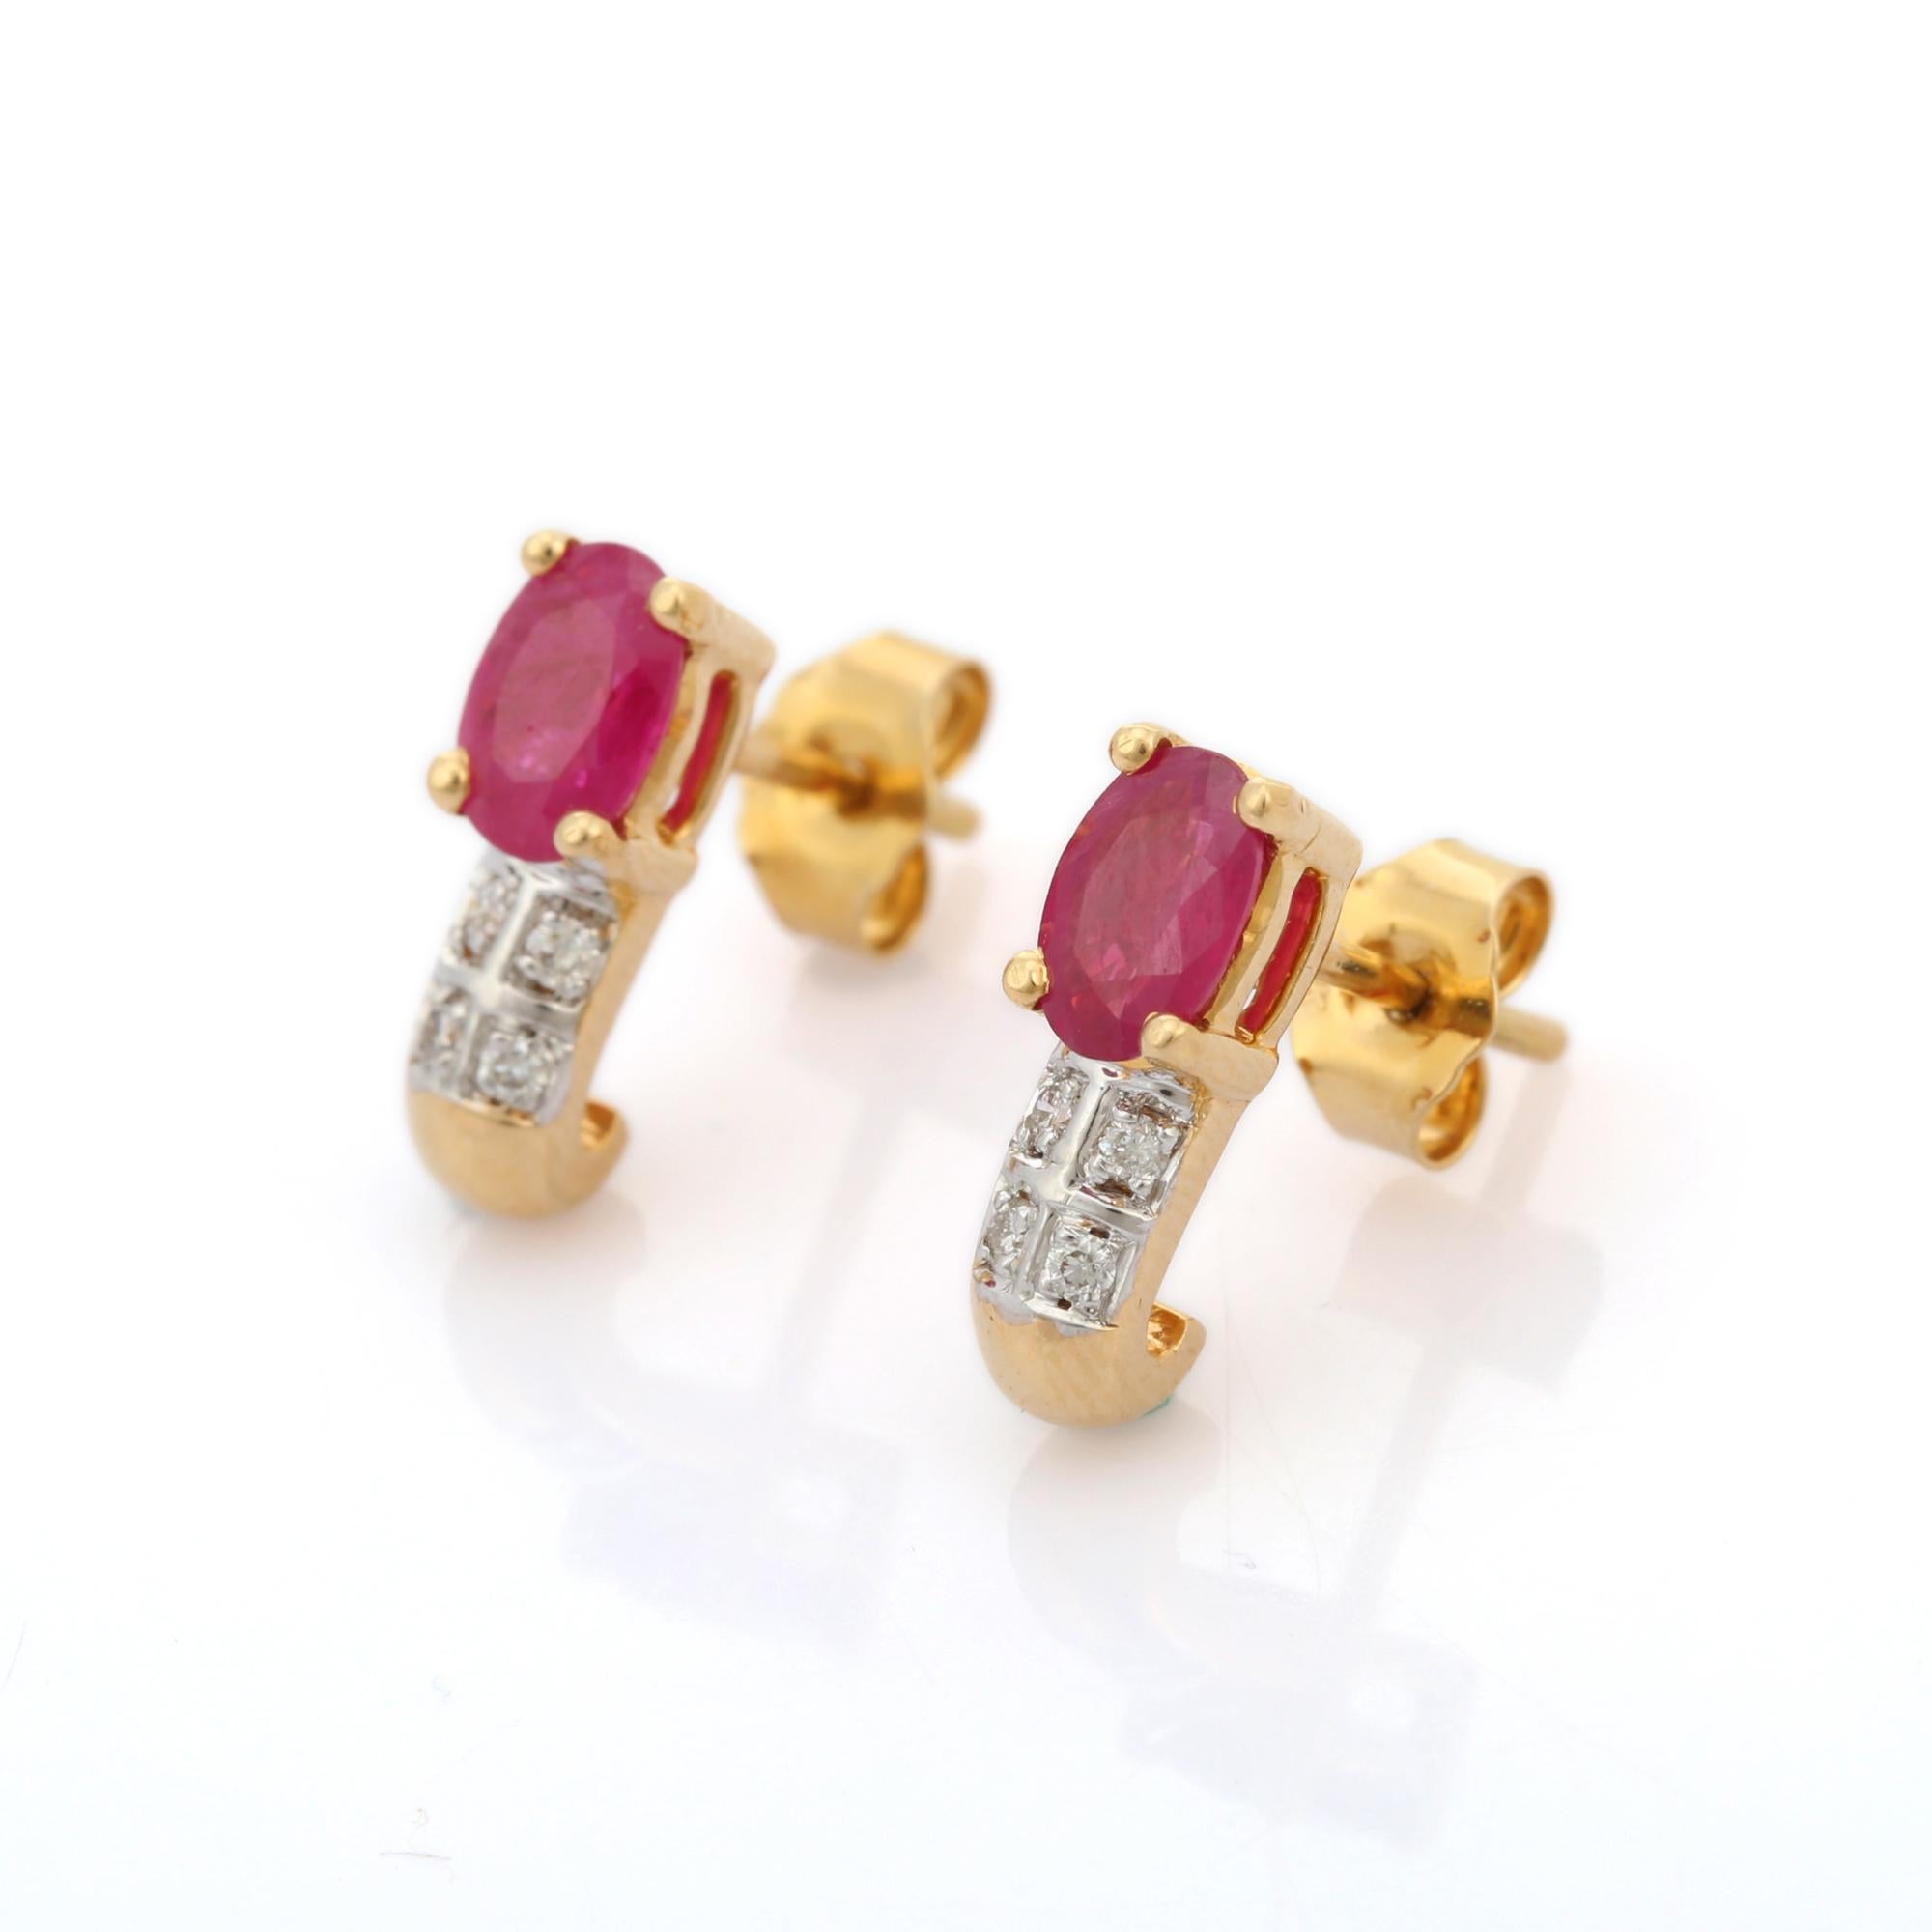 Oval Cut 18K Yellow Gold 1.4 Ct Ruby and Diamond Stud Earrings, Ruby Earrings for Her For Sale